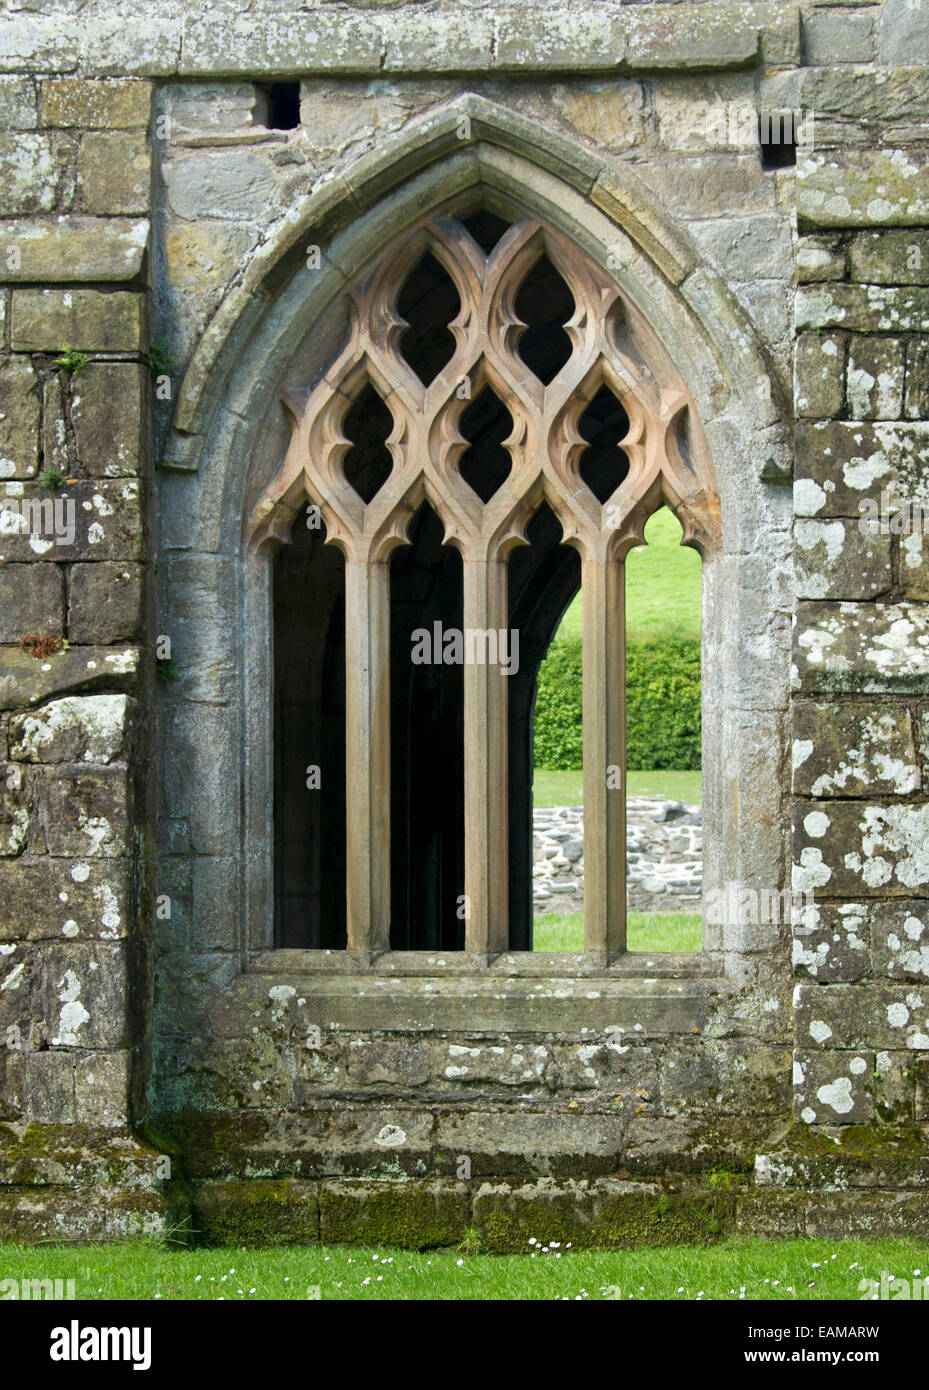 Large ornate arched window in wall of 13th century Valle Crusis abbey ruins  near Llantysilio in Wales Stock Photo